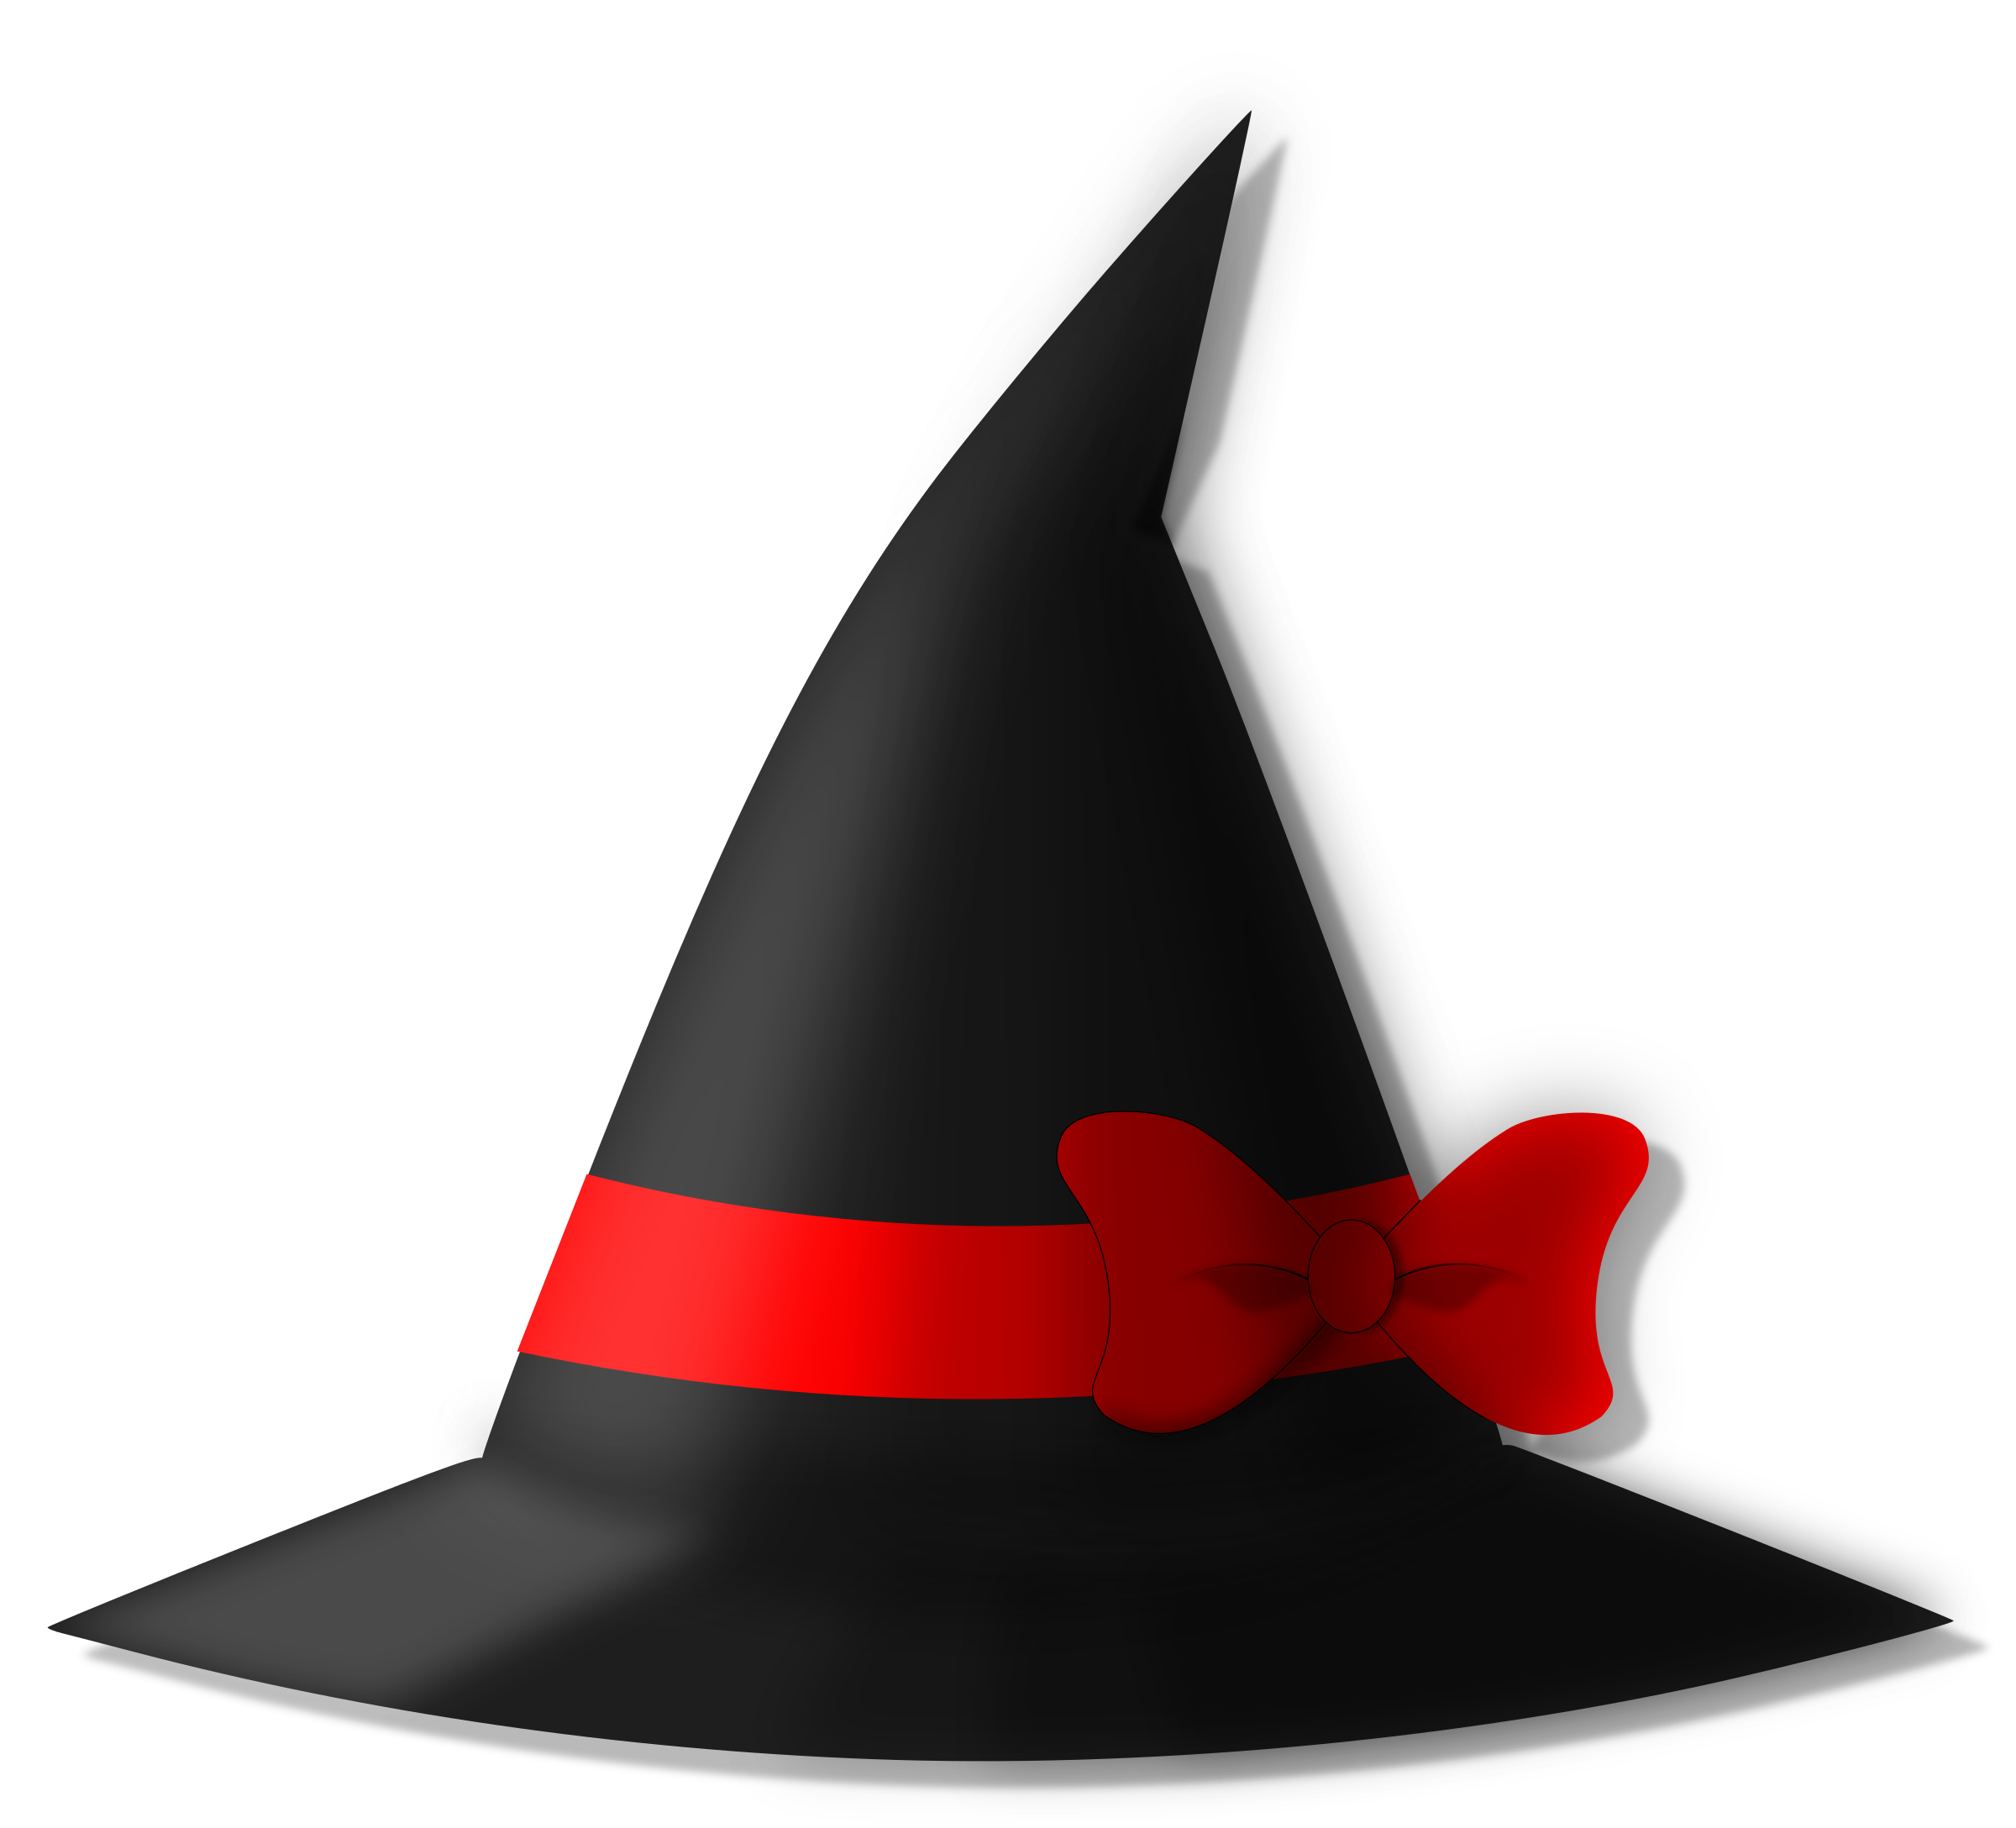 Witch Hat clipart #4, Download drawings